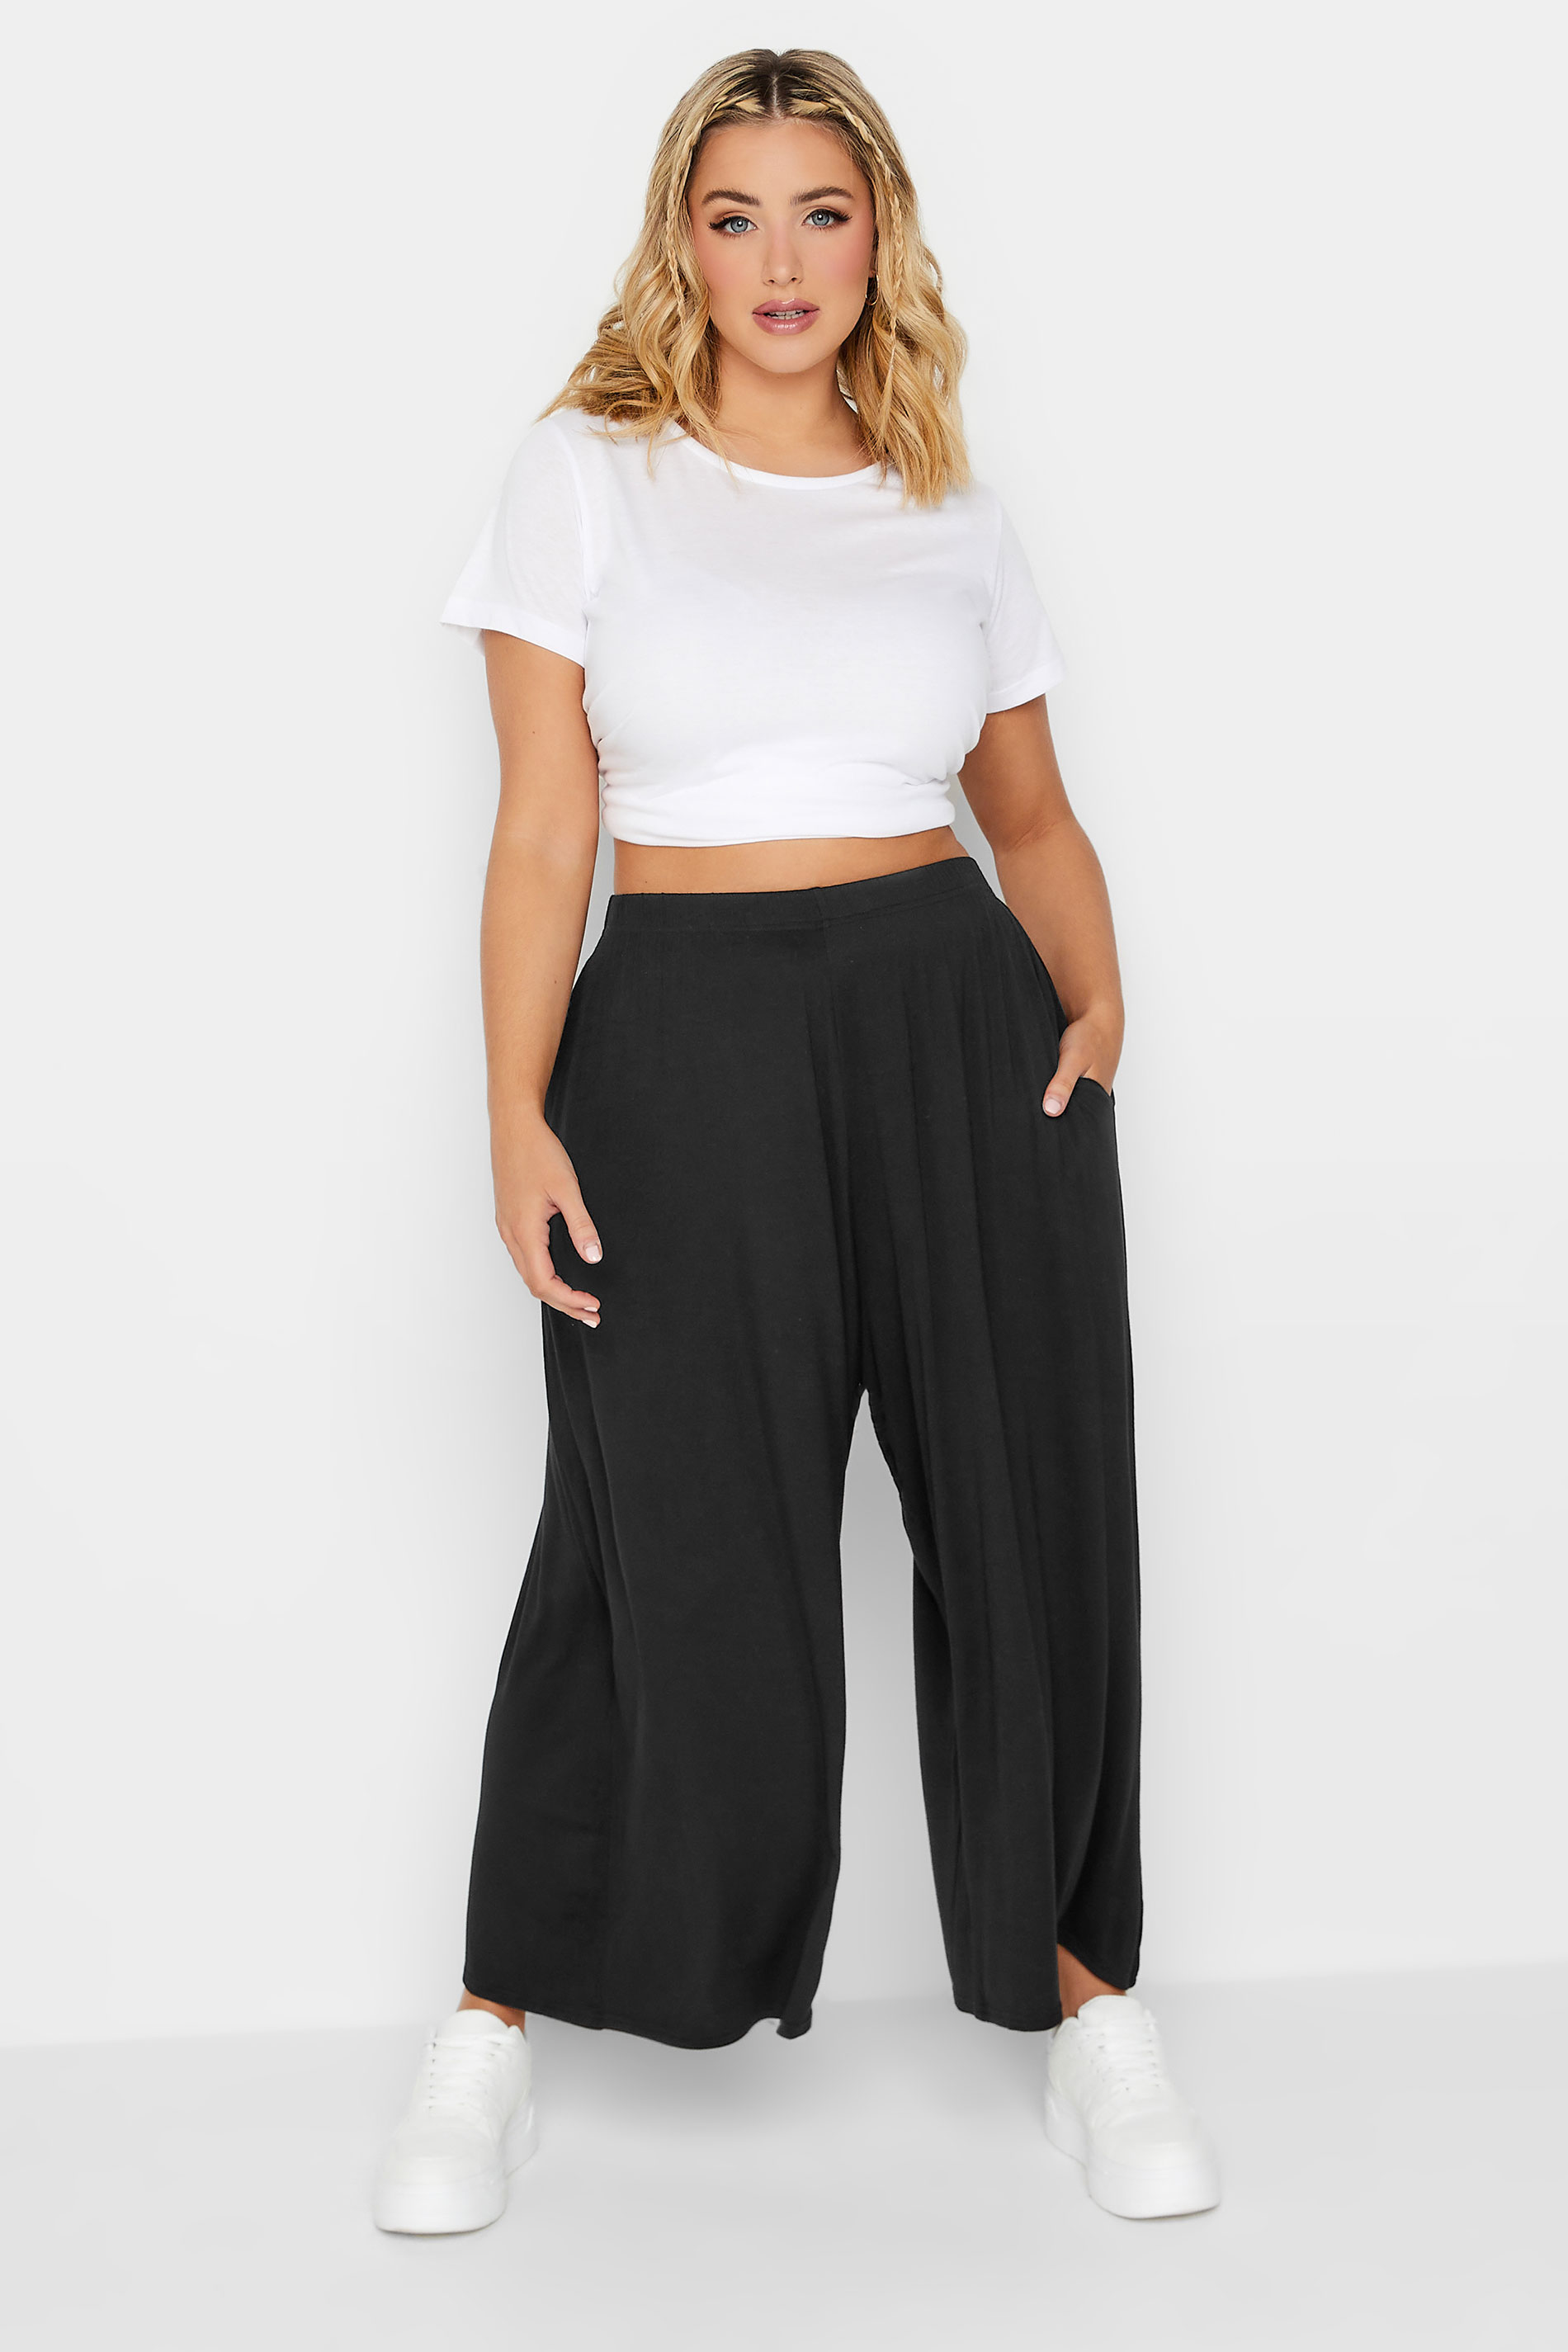 LIMITED COLLECTION Plus Size Black Extra Wide Leg Culottes | Yours Clothing  2